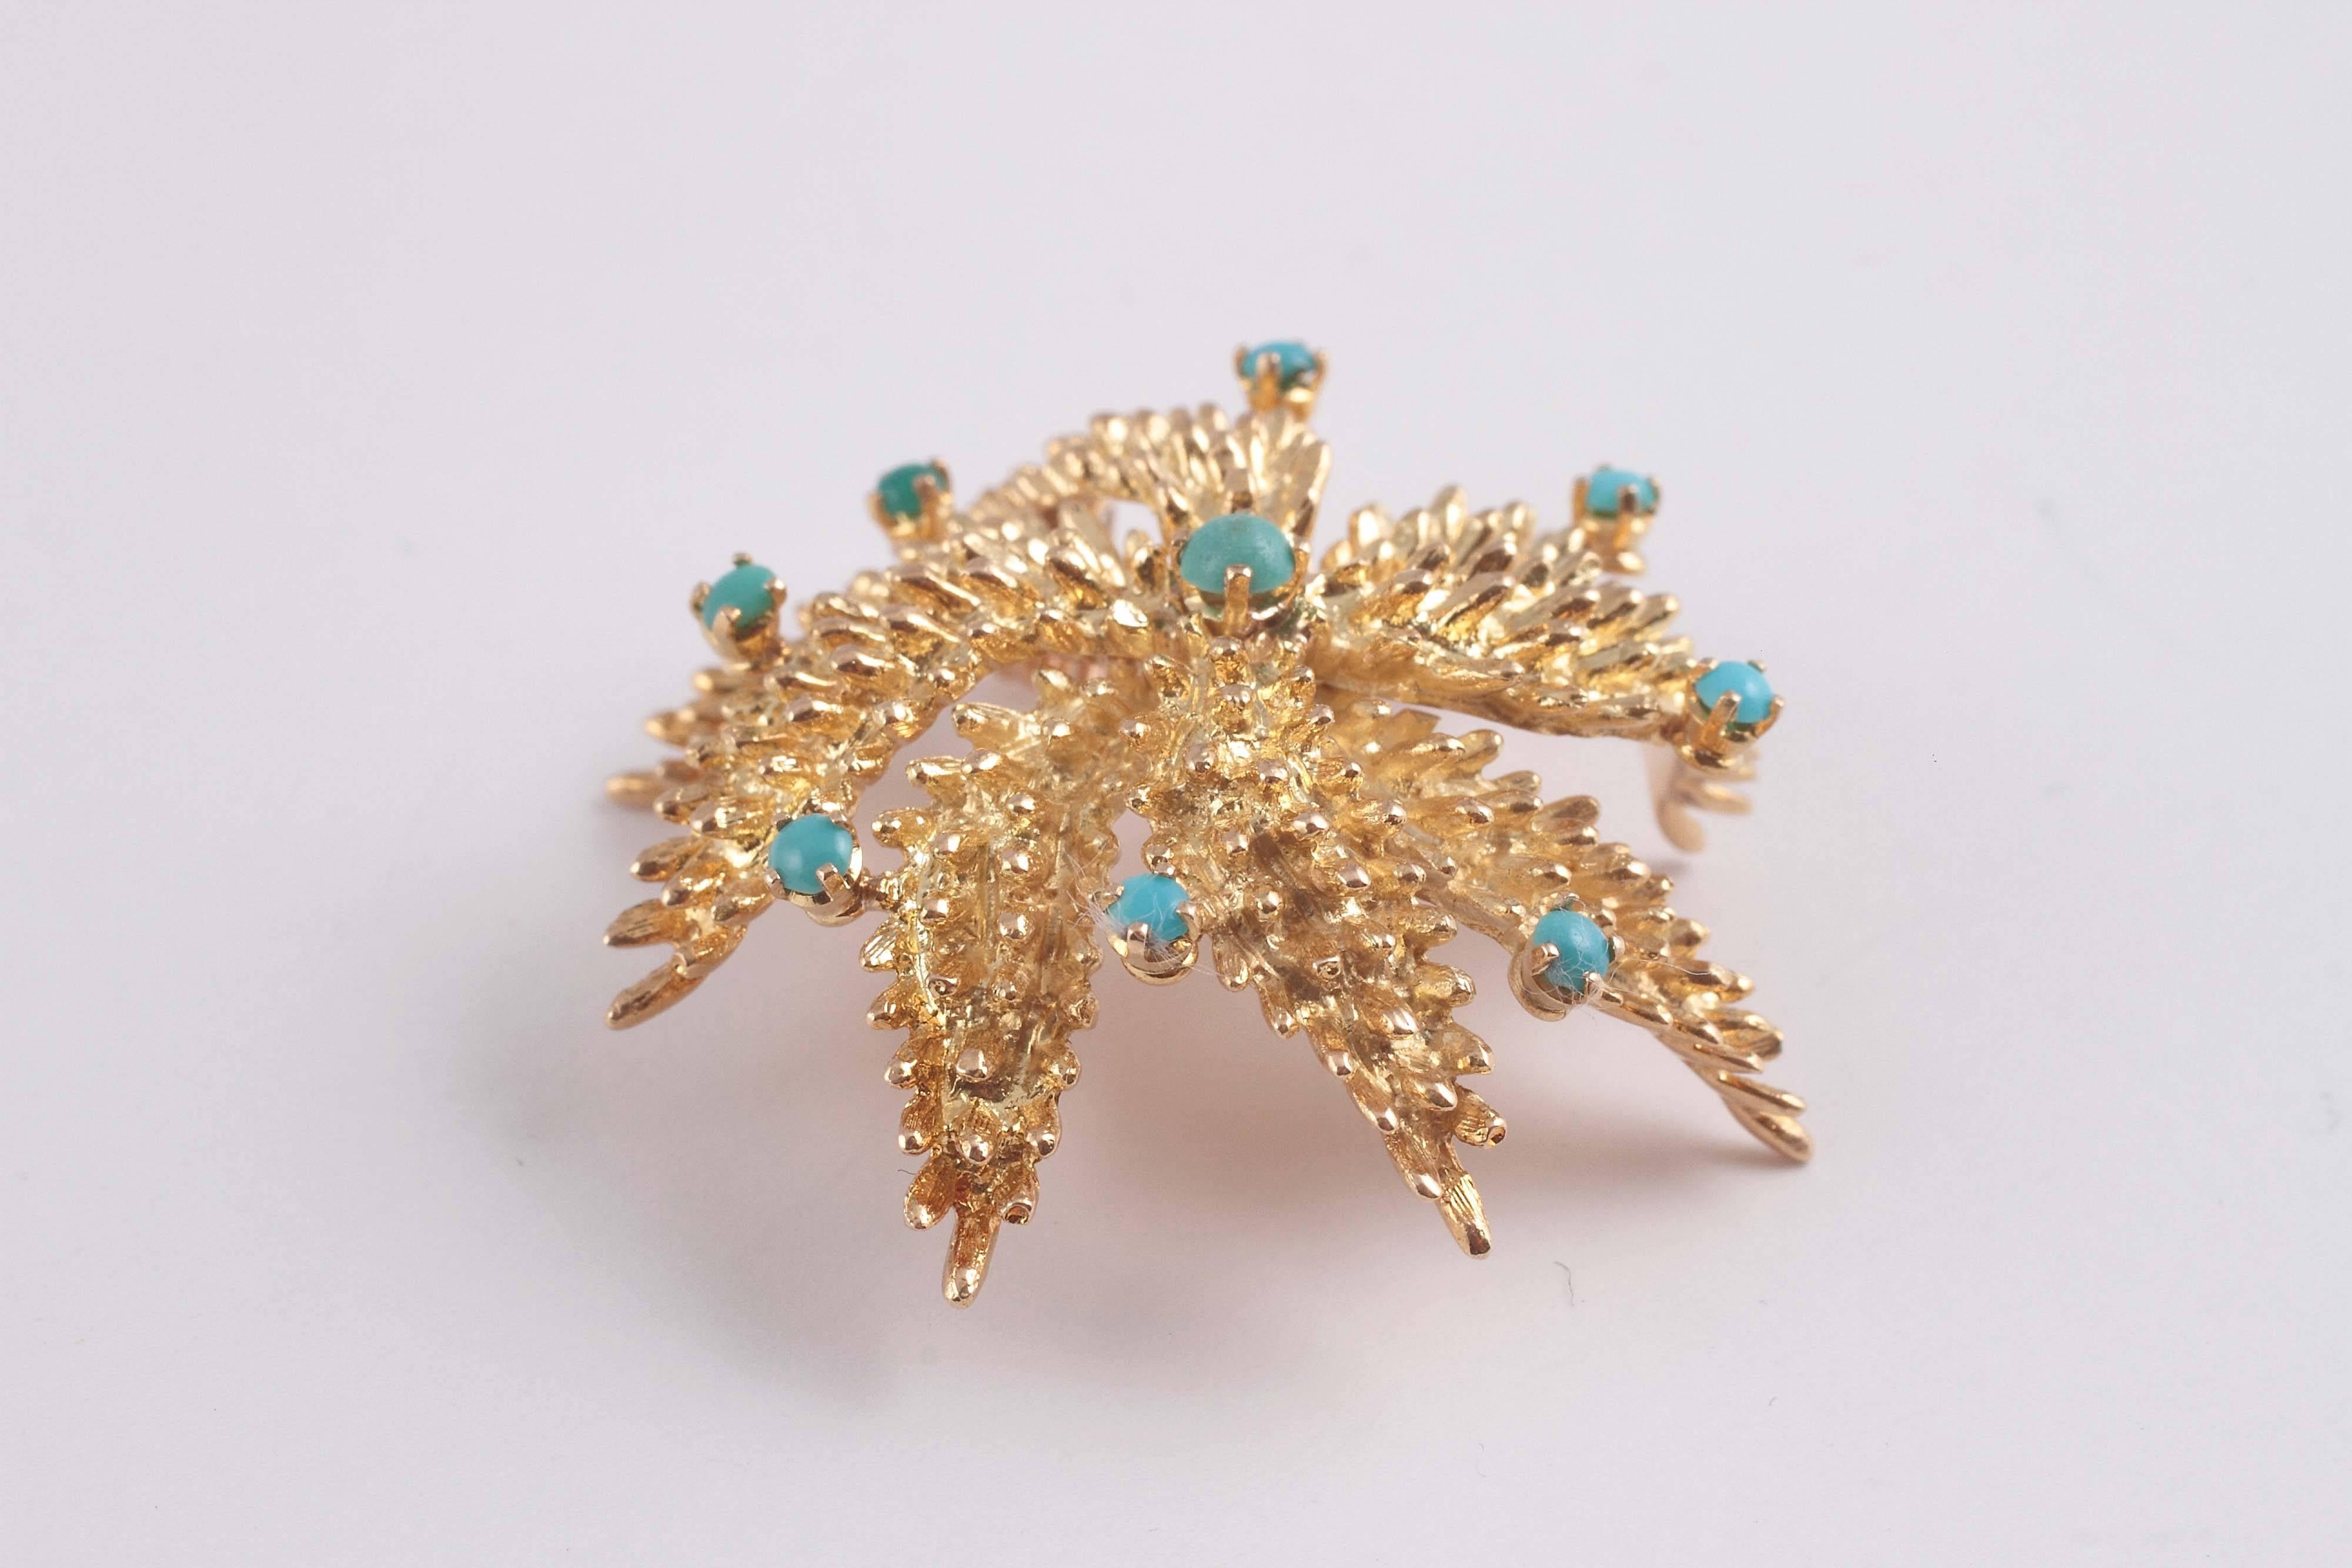 18 karat textured gold in a spiral star shape with turquoise beads.  A fun look for any outfit. 